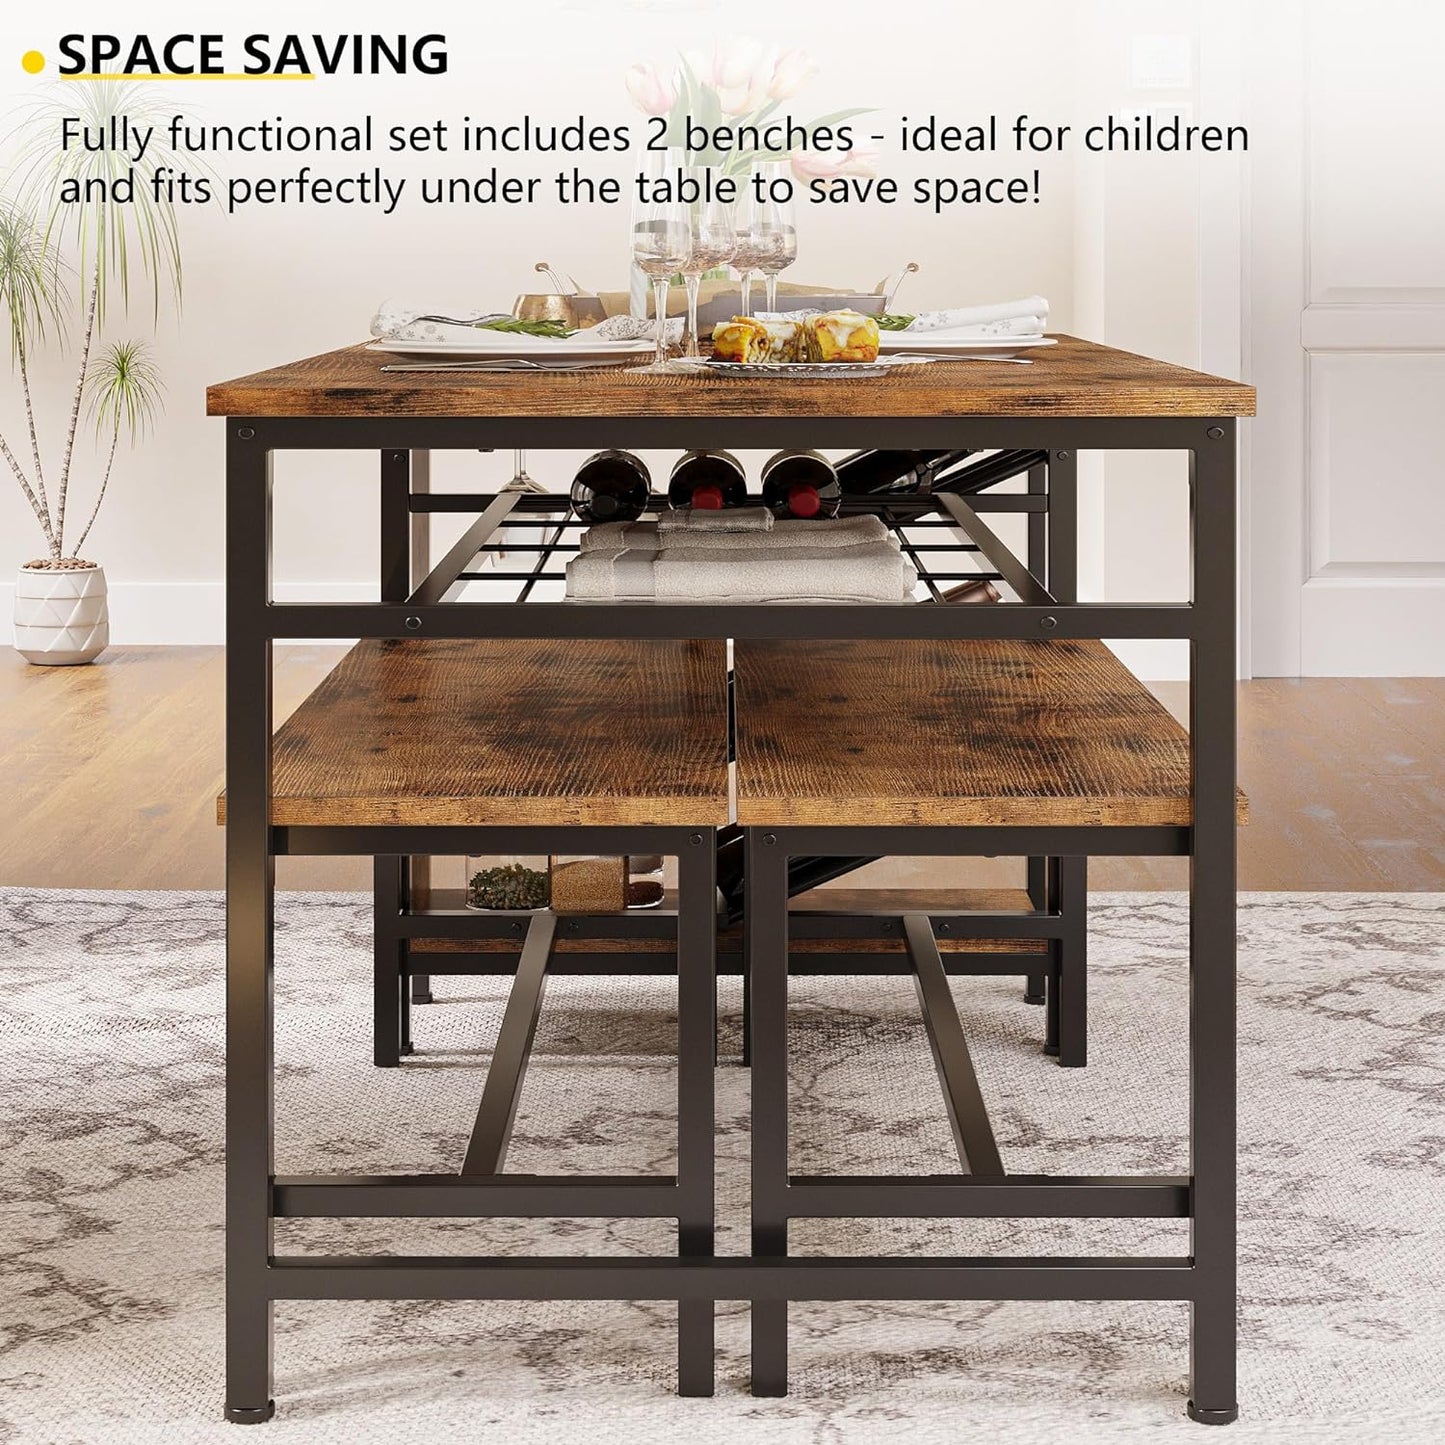 IRONCK 3PC Dining Table Set with 2 Benches